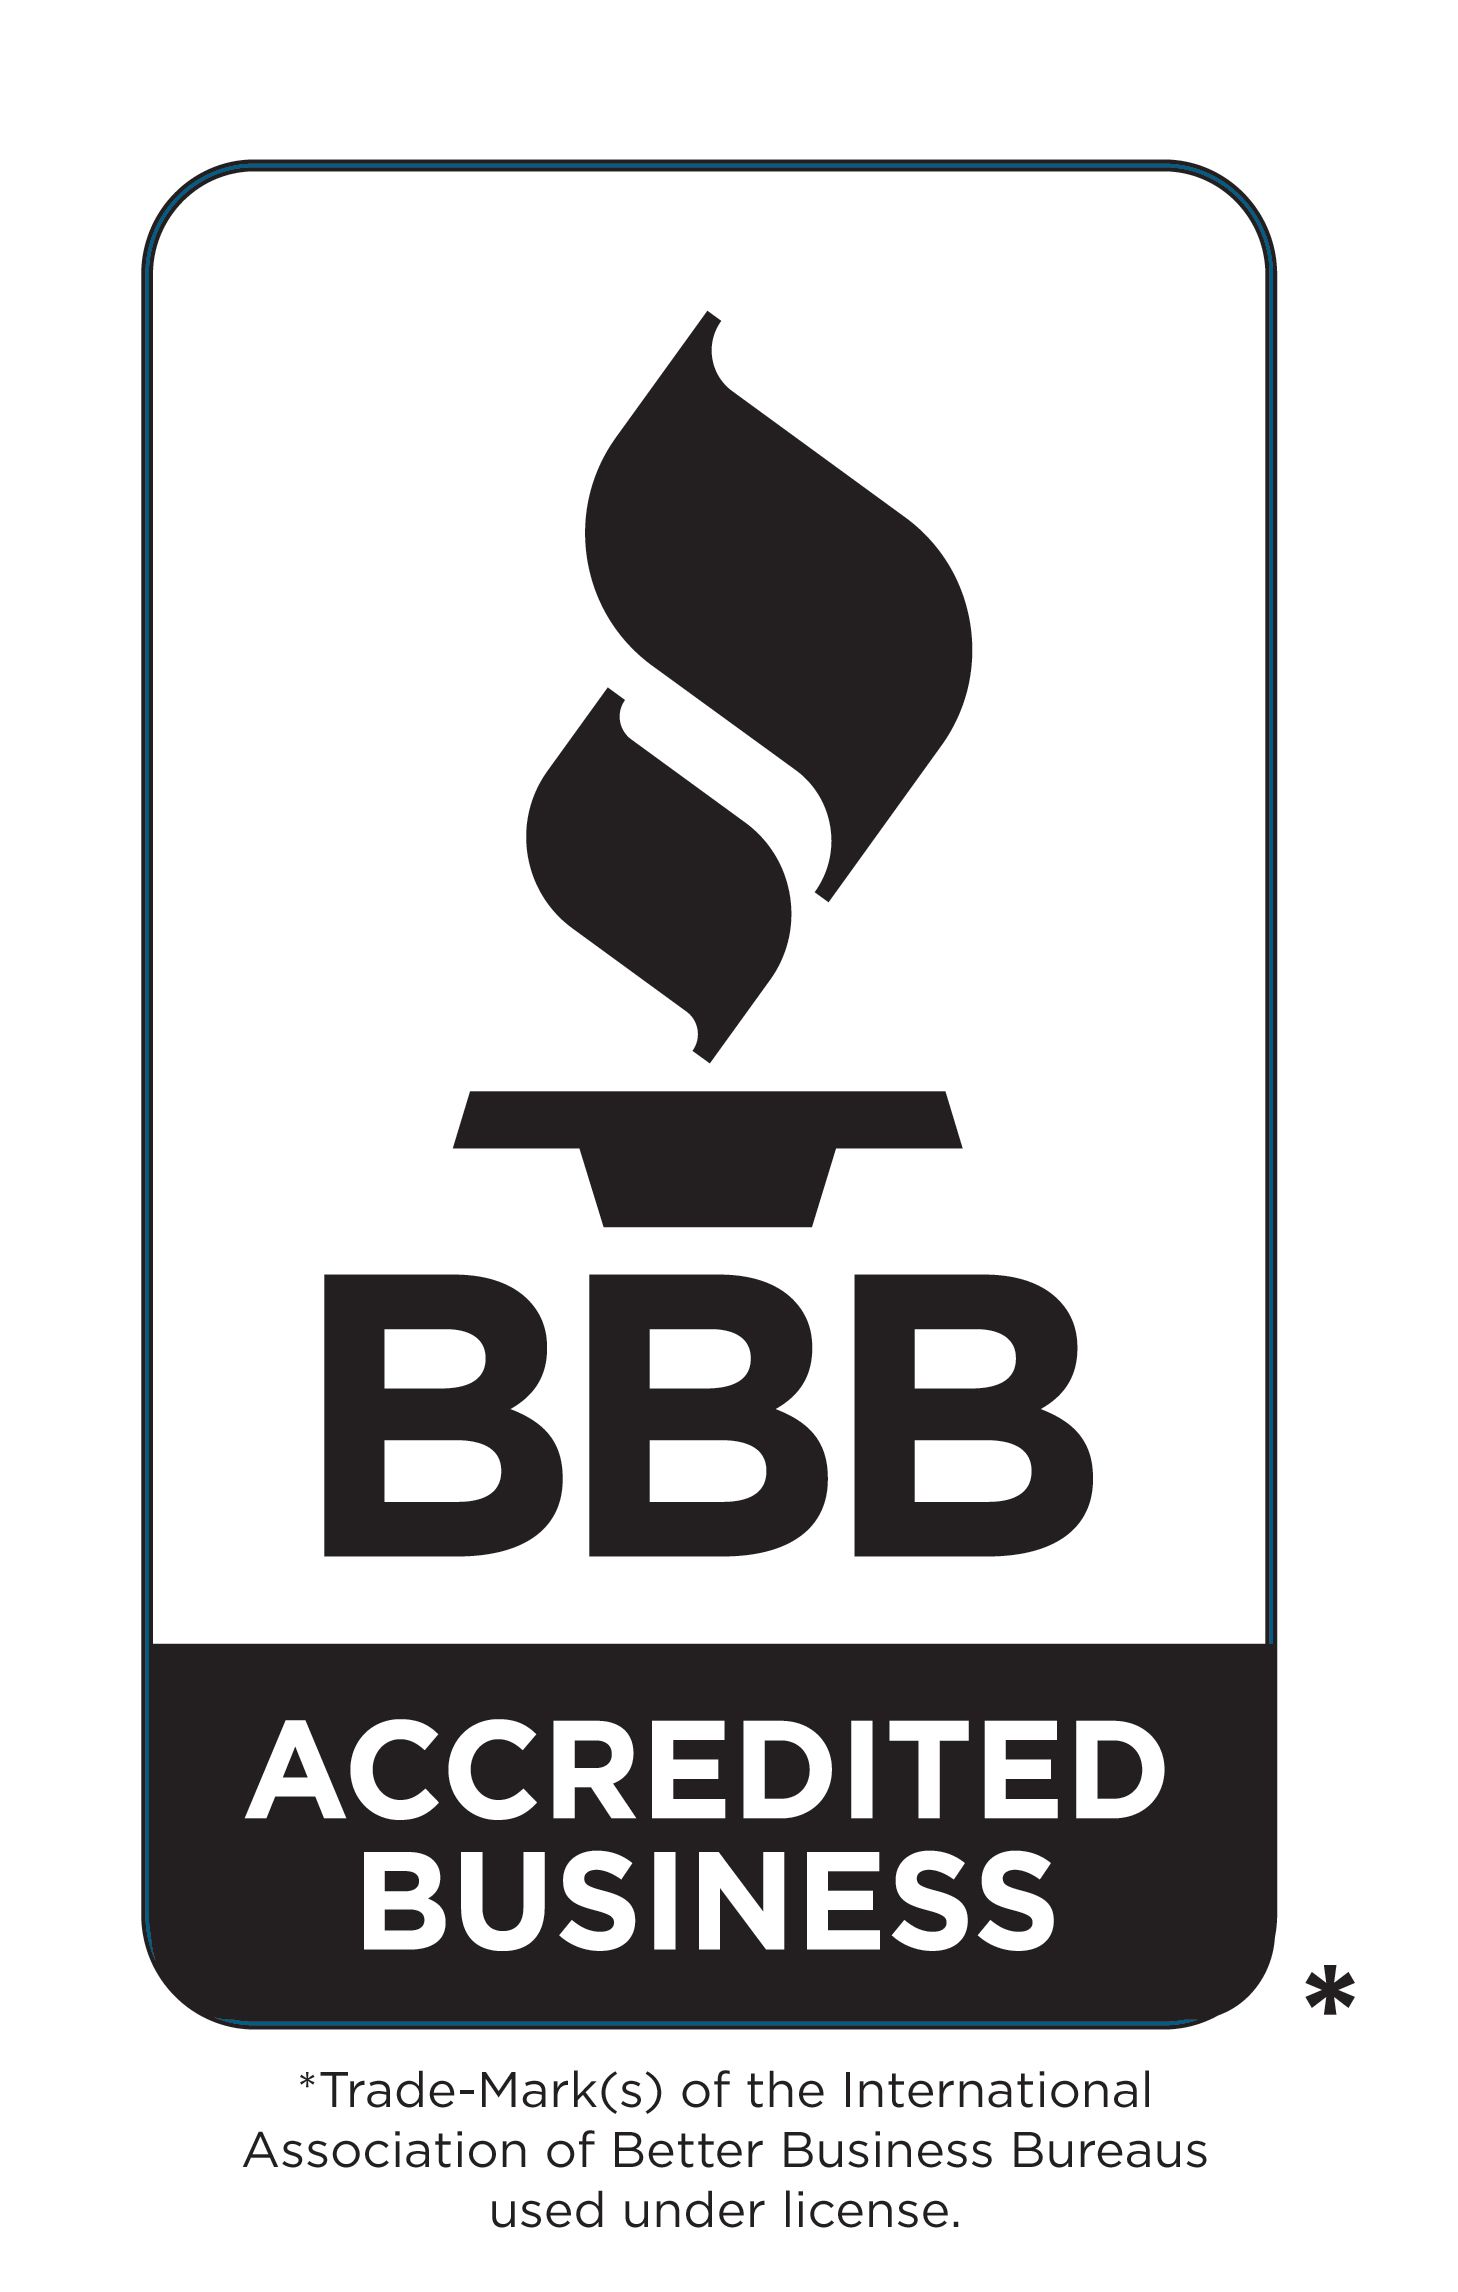 A black and white logo for bbb accredited business